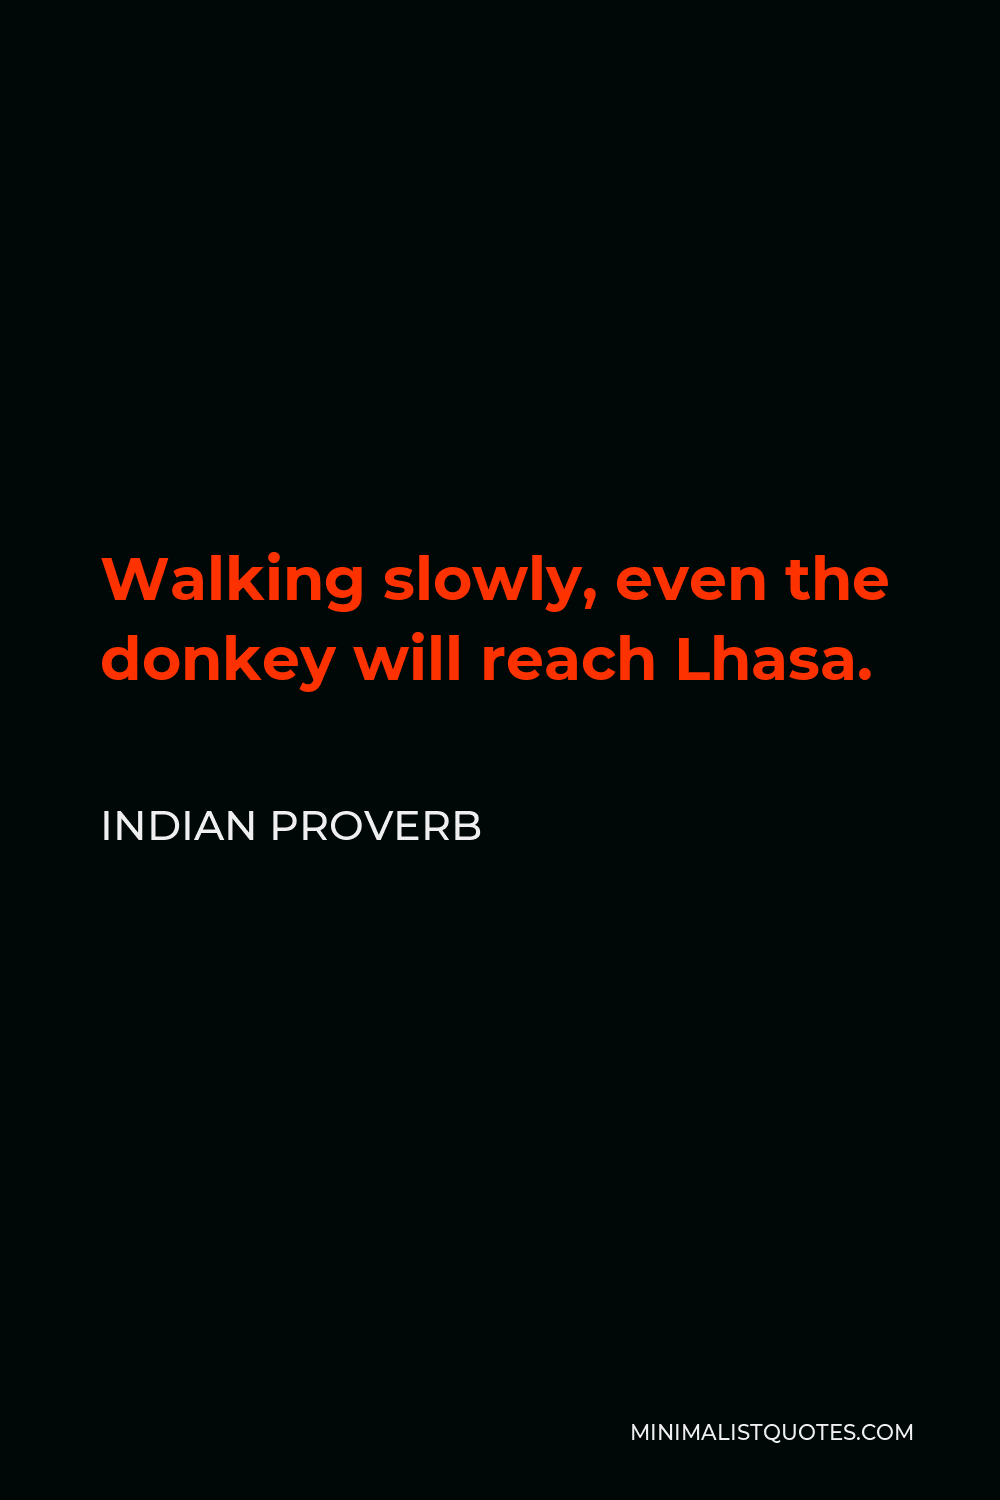 Indian Proverb Quote - Walking slowly, even the donkey will reach Lhasa.